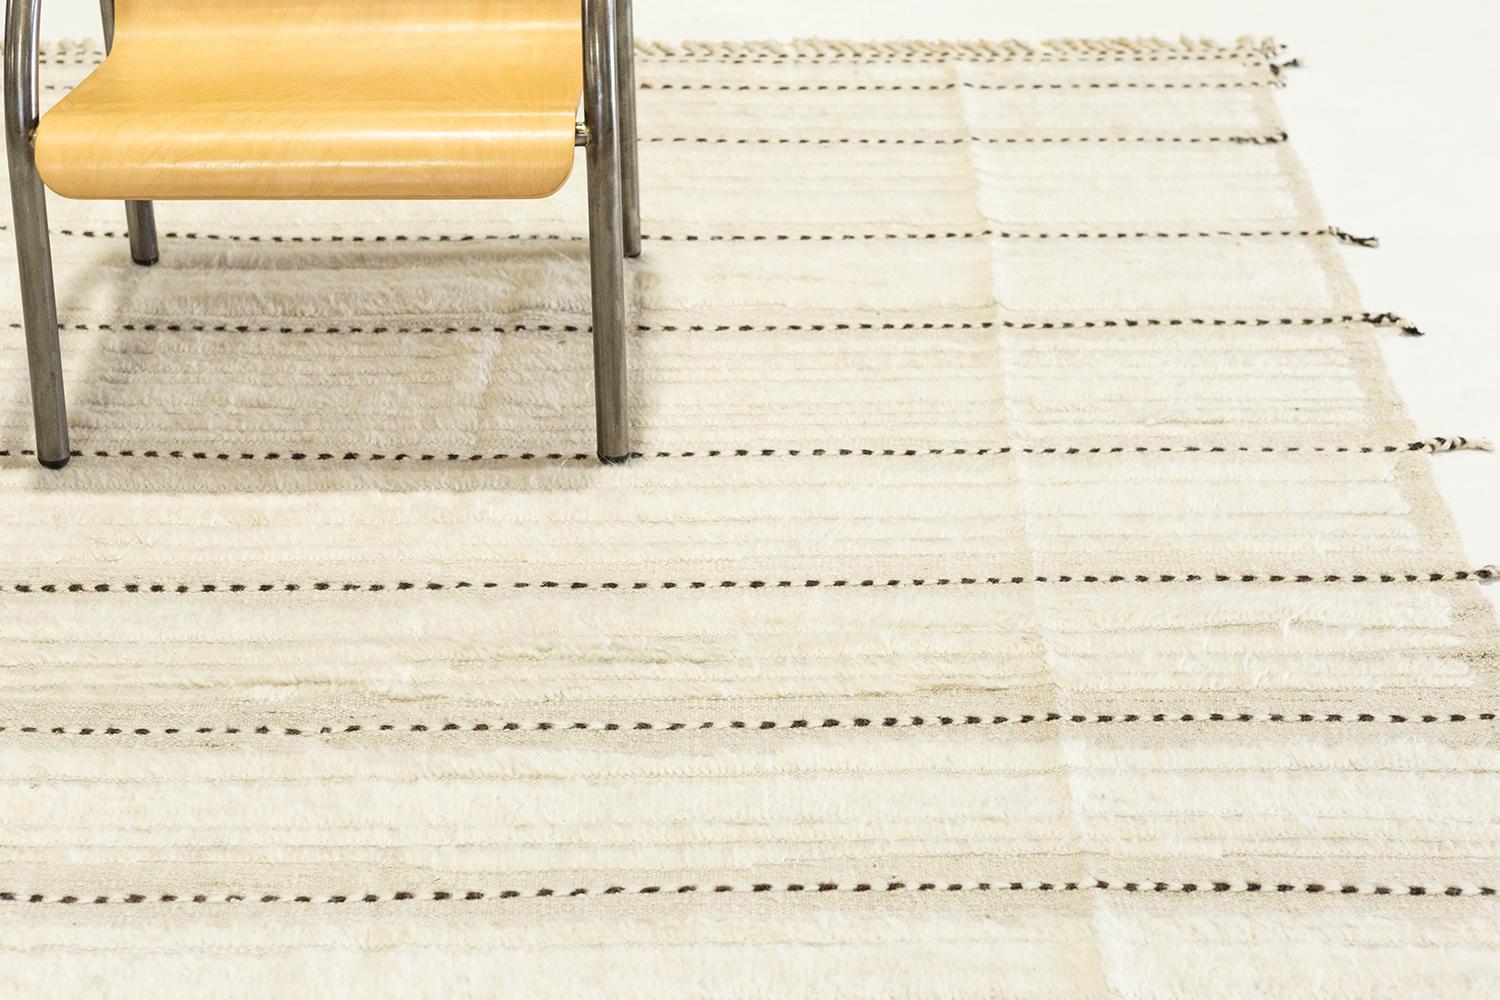 'Kit Moresby' has become an LA staple and the signature rug of Malibu. Handwoven of luxurious wool, with timeless design elements and a neutral color palette. This Mehraban design is a contemporary interpretation of an Azilal, a part of our Atlas